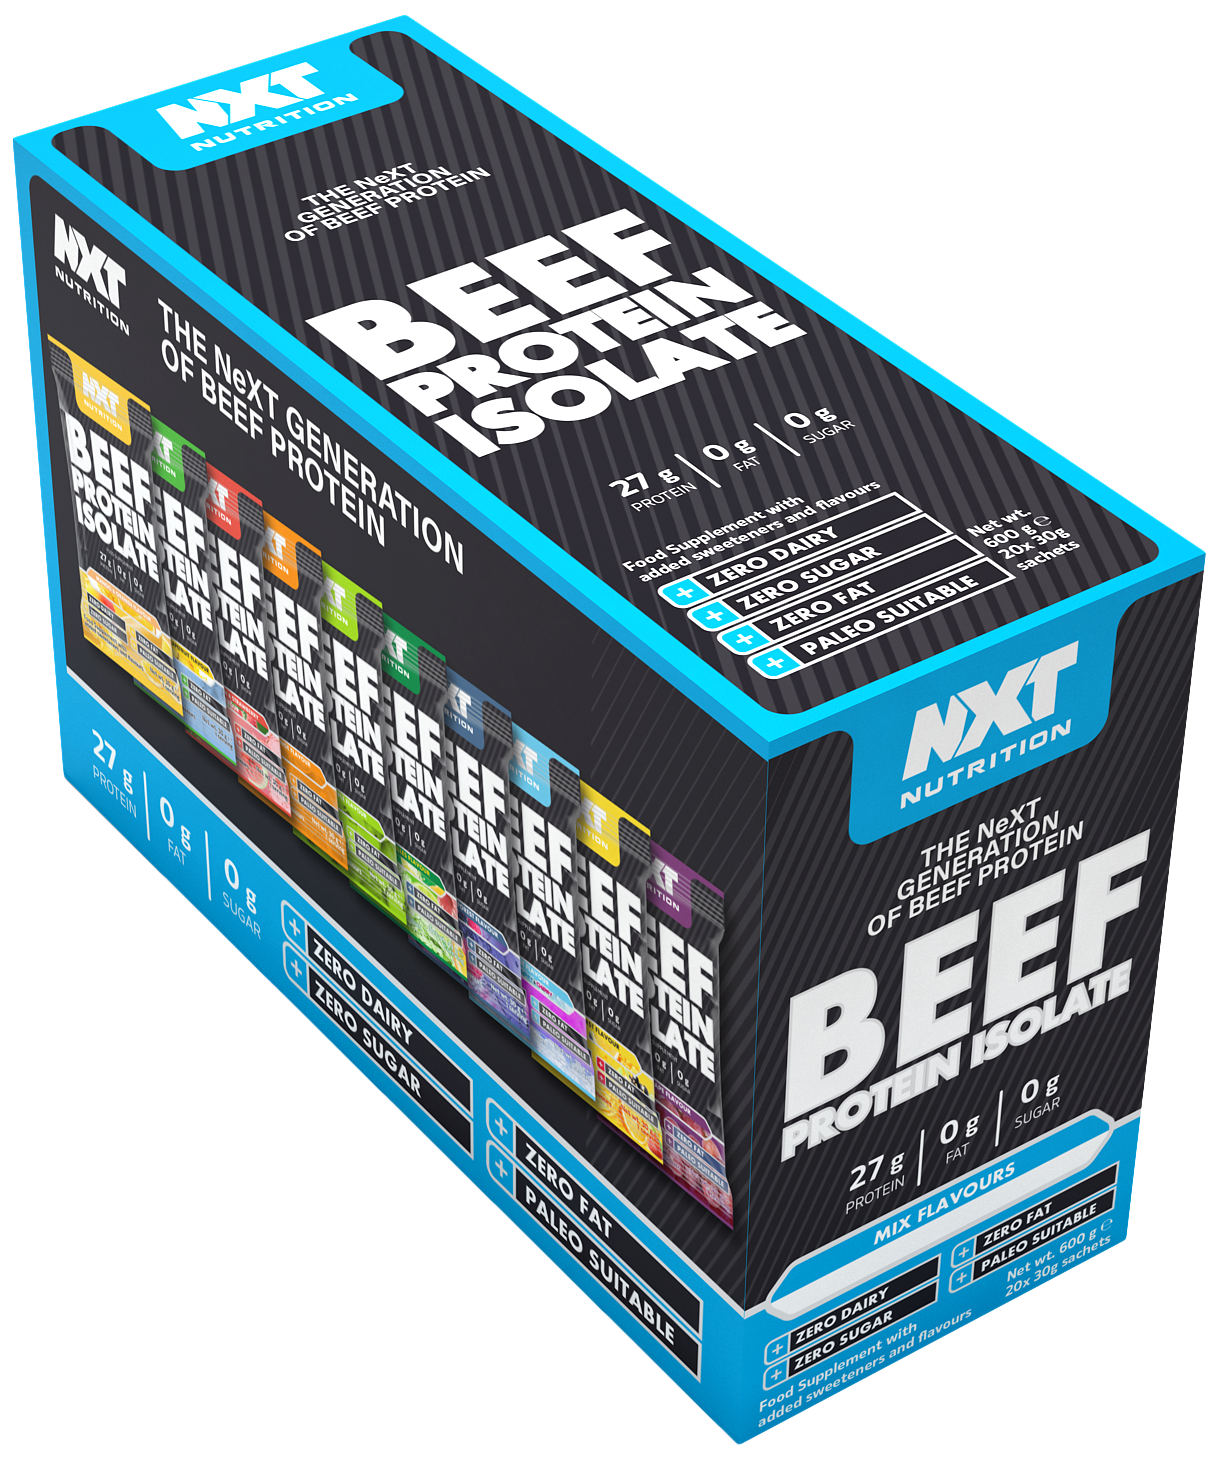 Beef Protein Mixed Sachets x 20